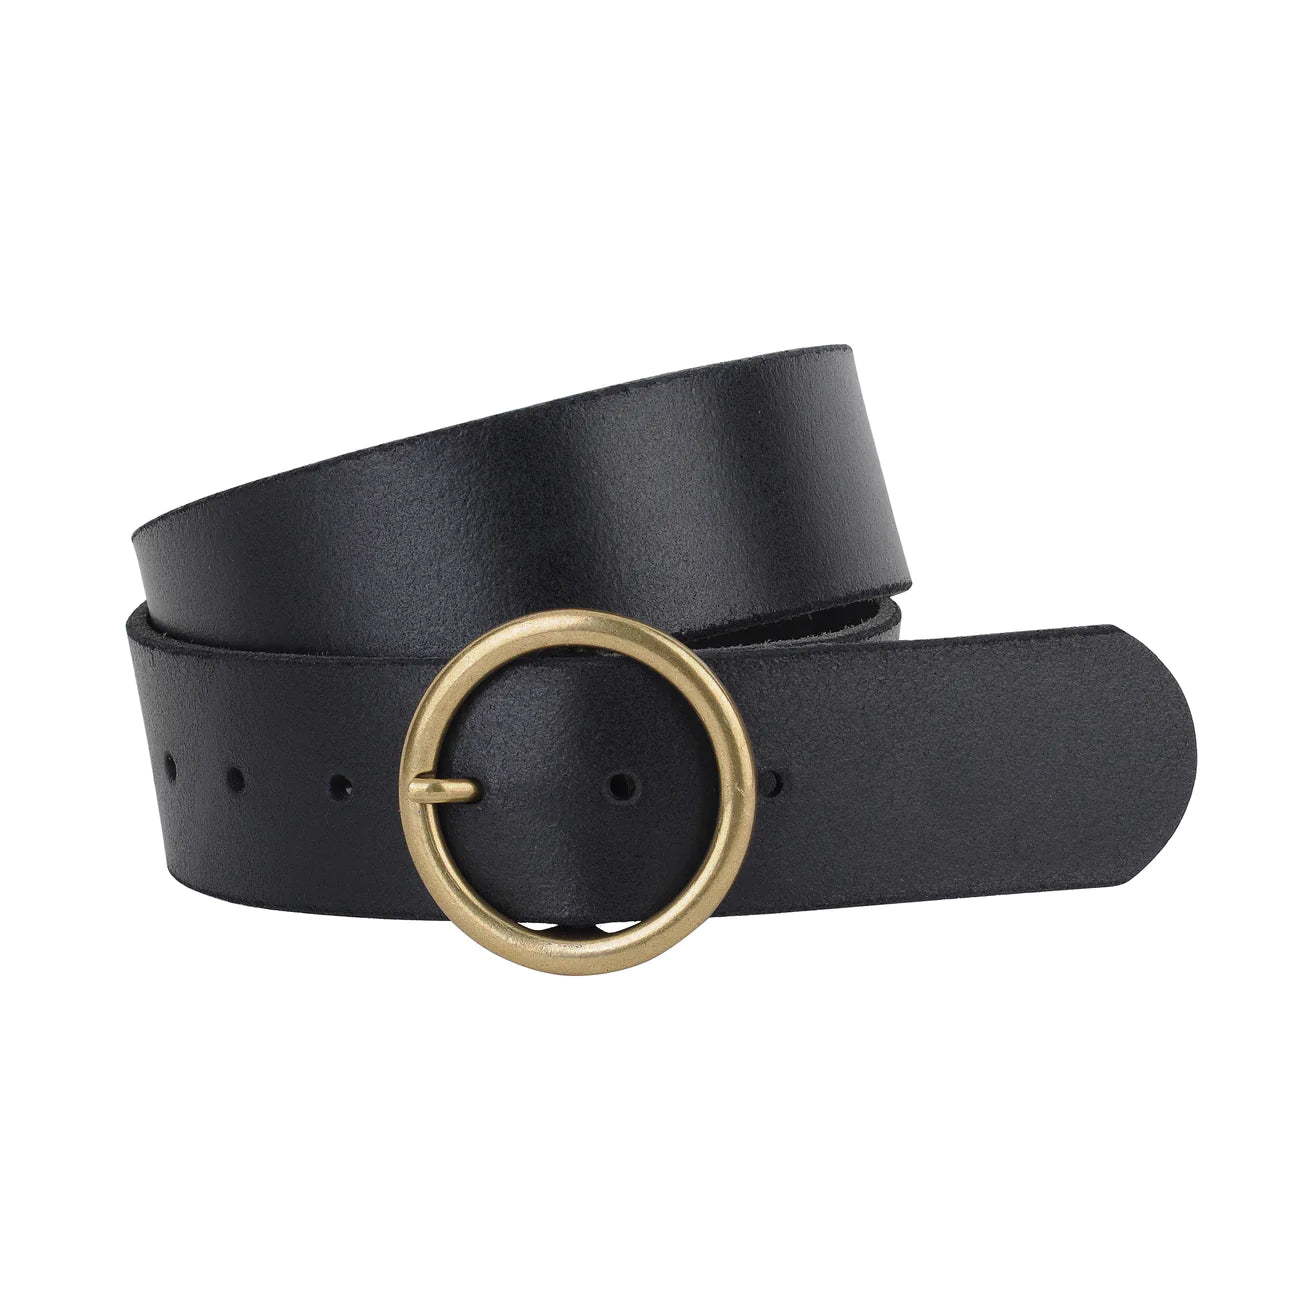 Wide Belt with Copper Tone Buckle - Black